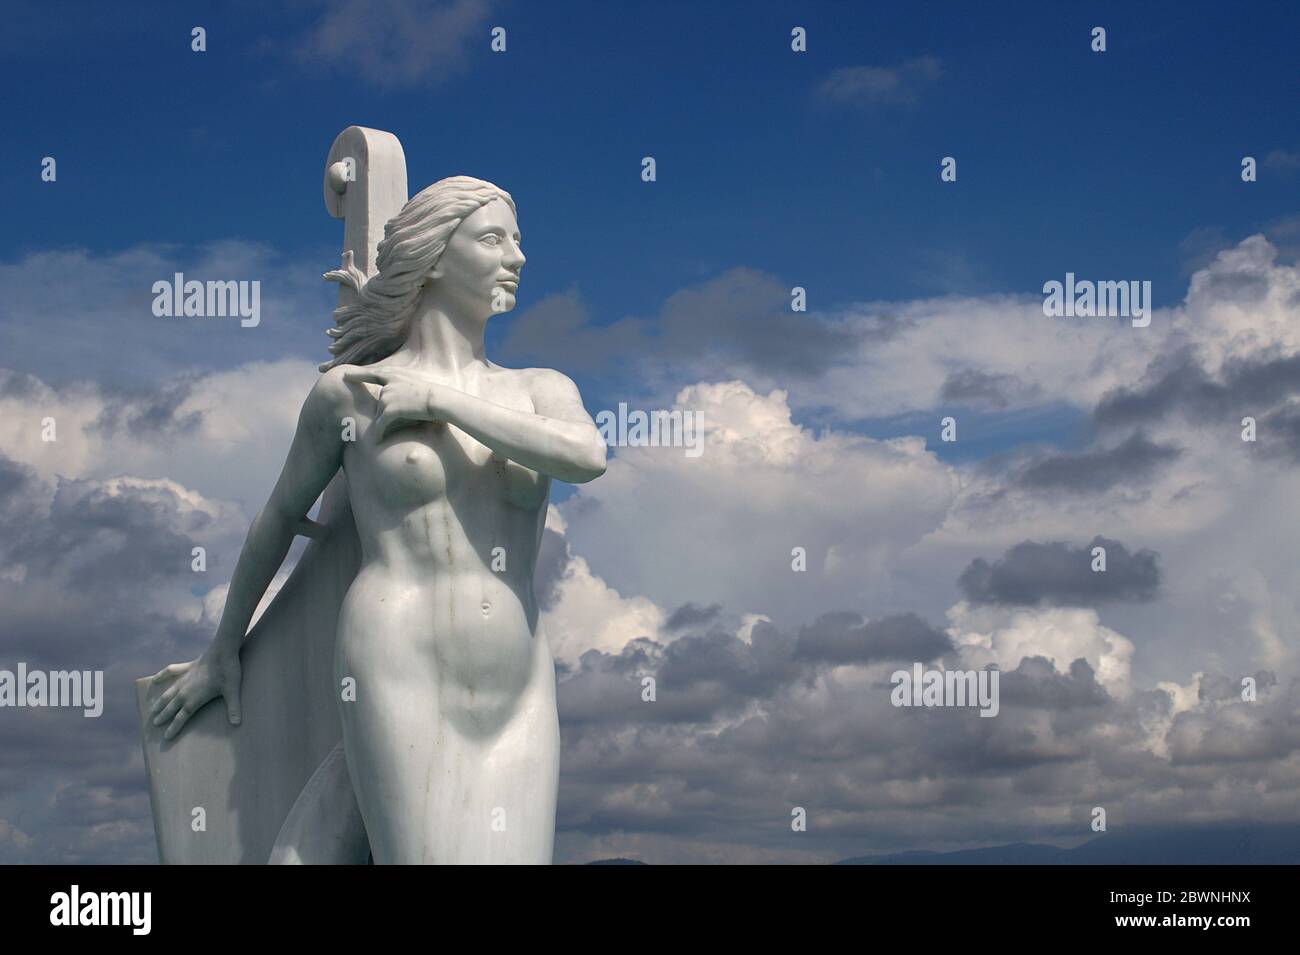 Mermaid sculpture in the port of Preveza town in Greece. Blue sky with clouds at the background Stock Photo